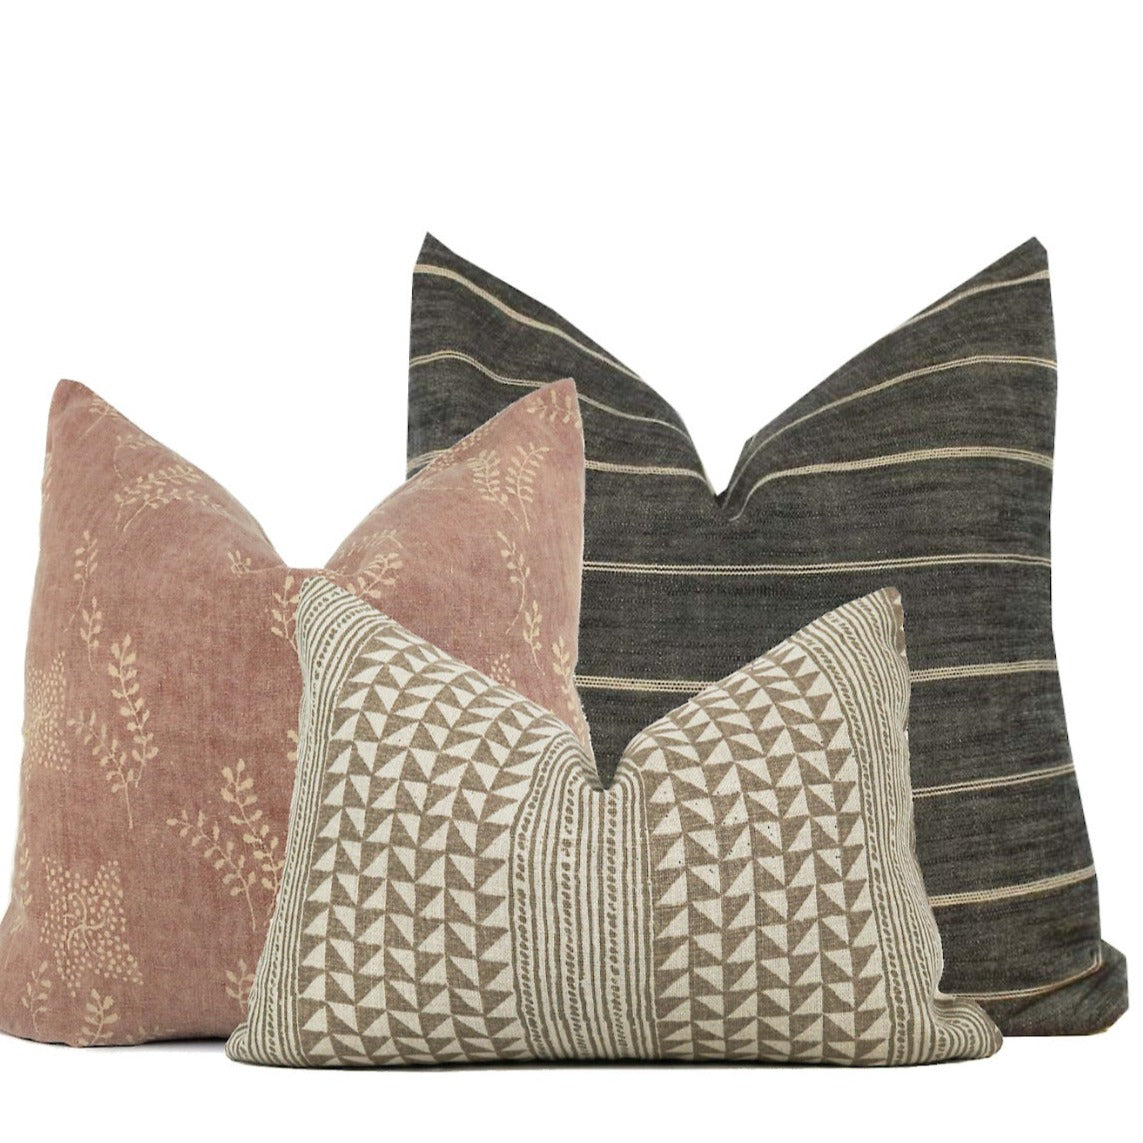 Pillow Cover set of 3 featuring a dark grey stripe pillow cover in 22"x22", a 20"x20" Blush/rust colors pillow cover with soft floral detail, and a 14x20 Aegean Stripe Pillow Cover with a beige and cream geometric design. 